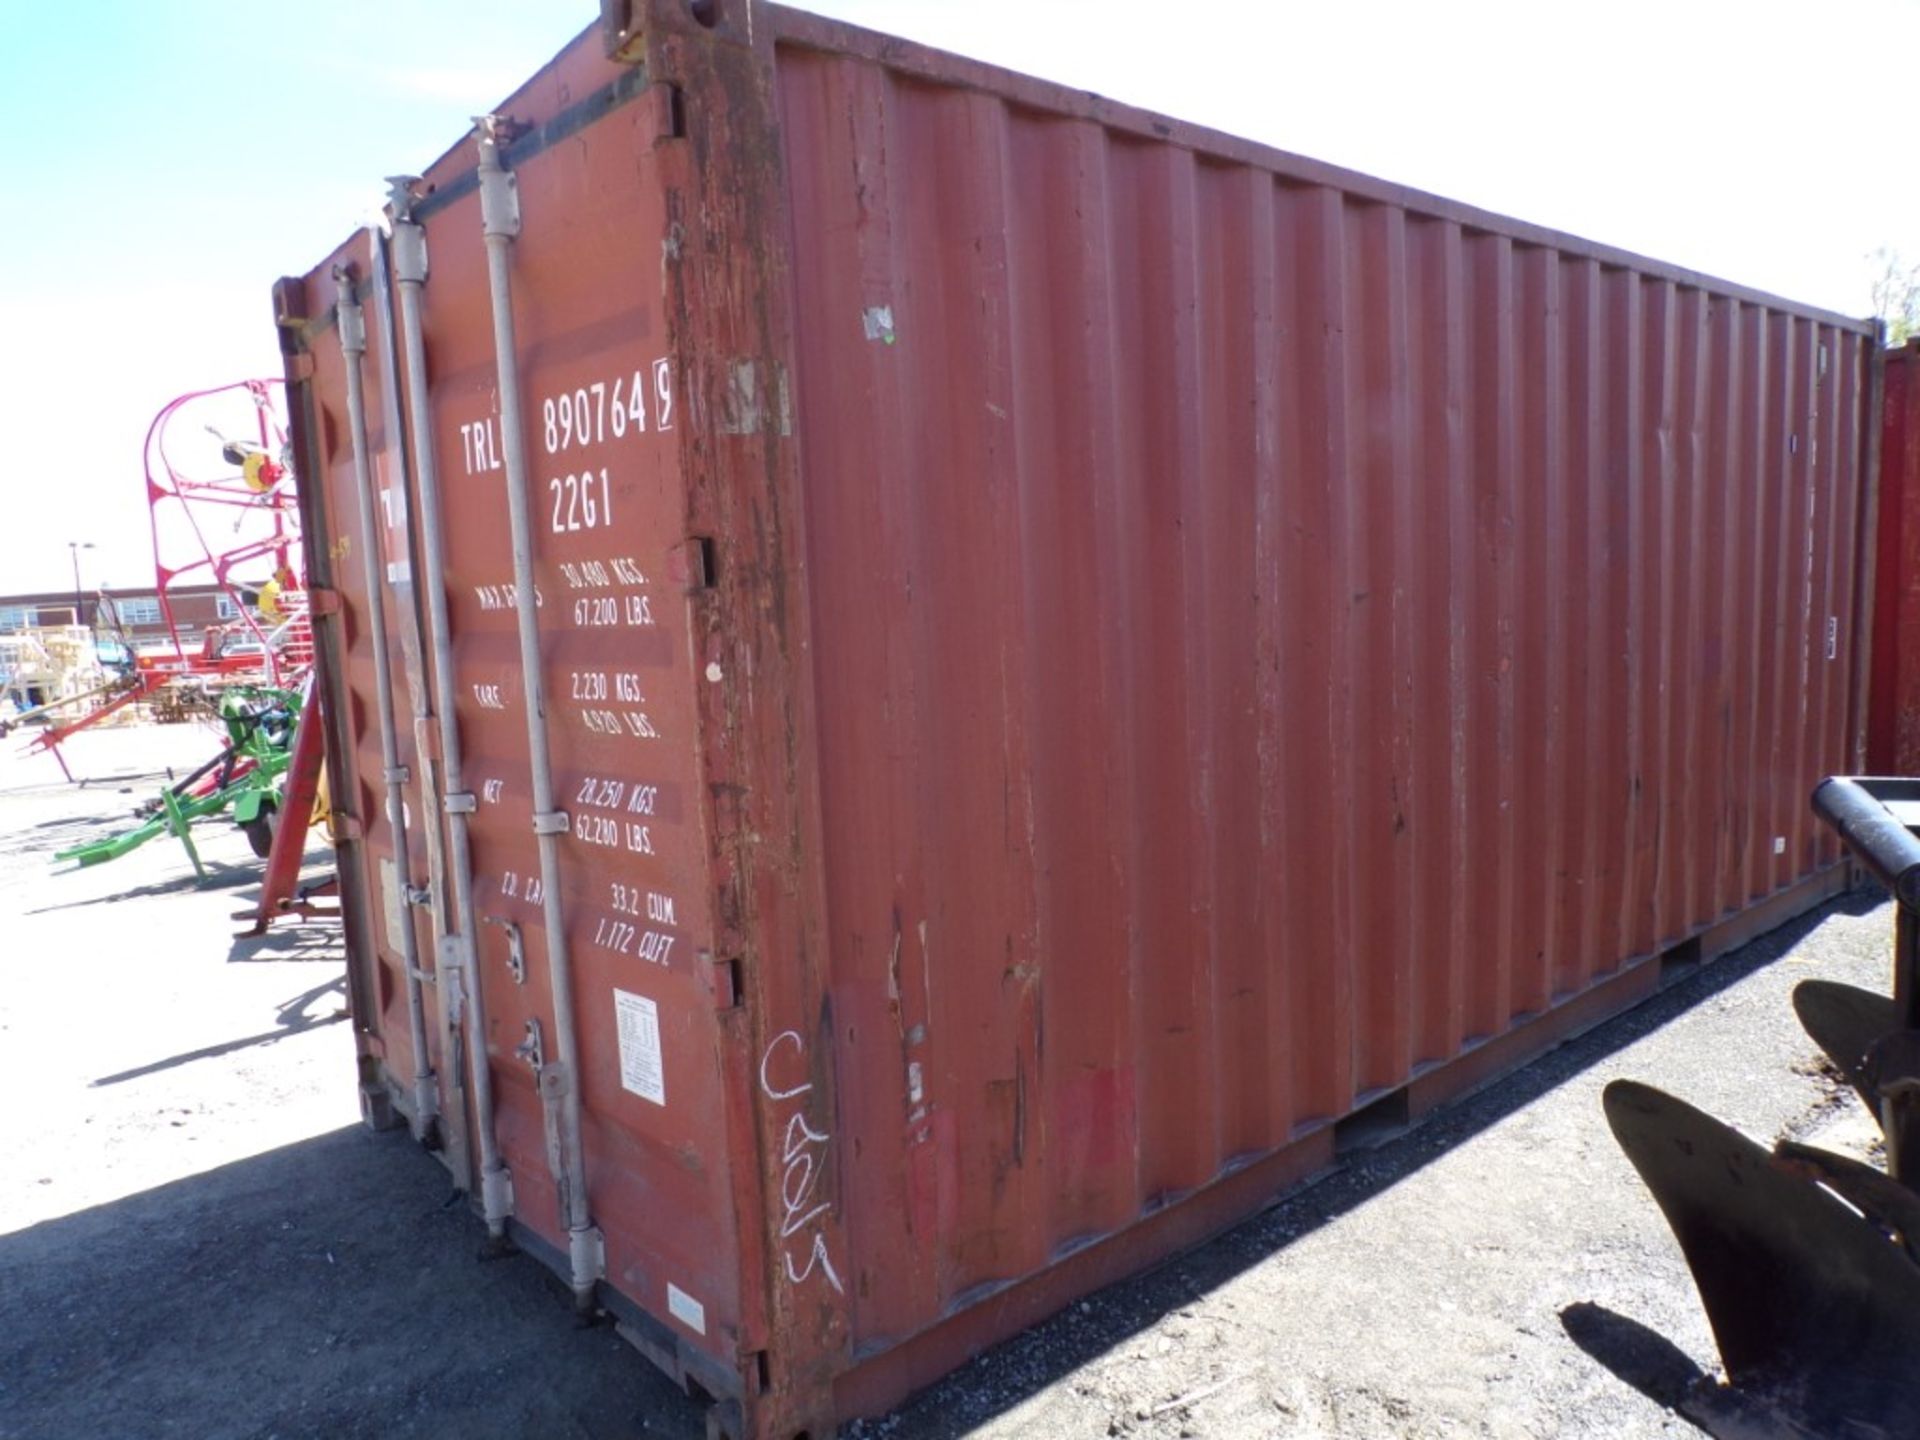 Red 20' Used Storage/Shipping Container, Cont. # TRLU8907649 (5137) - Image 2 of 2